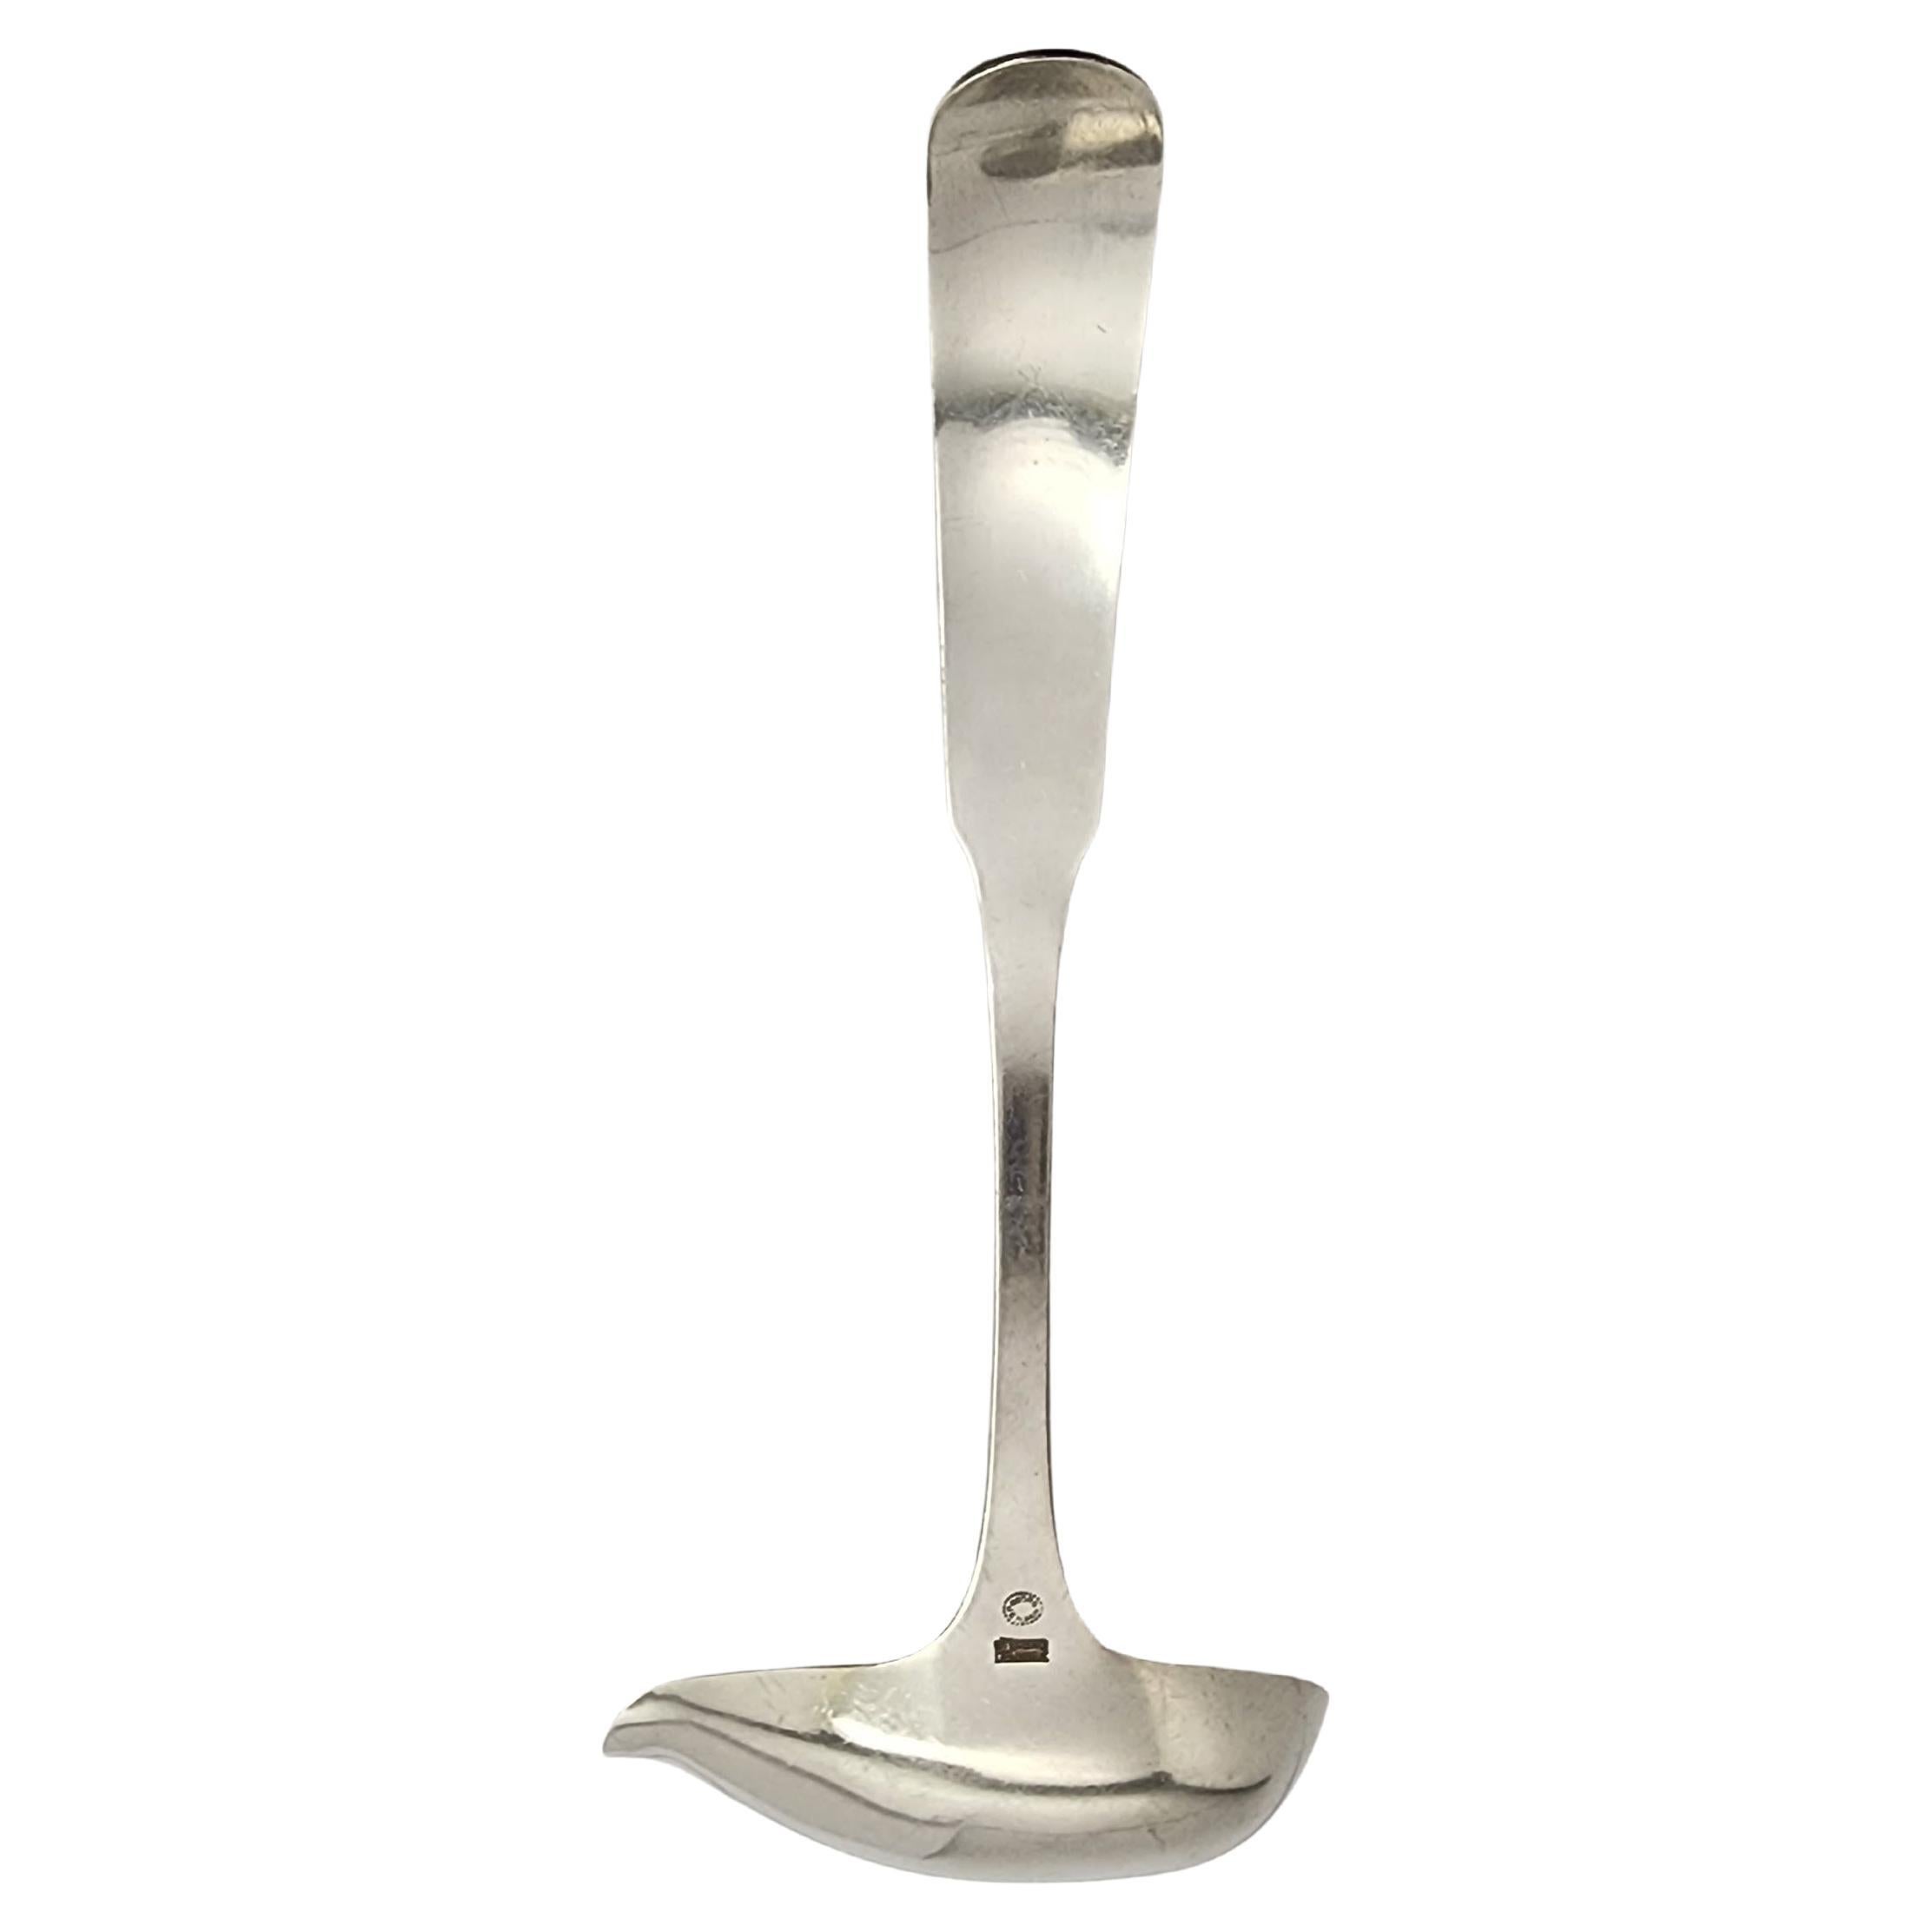 Sterling silver sauce ladle by Georg Jensen Denmark in the Rope pattern.

The Rope or Perle pattern was designed by Georg Jensen in 1916. This small ladle features a spouted bowl.

Measures approx 7 3/8